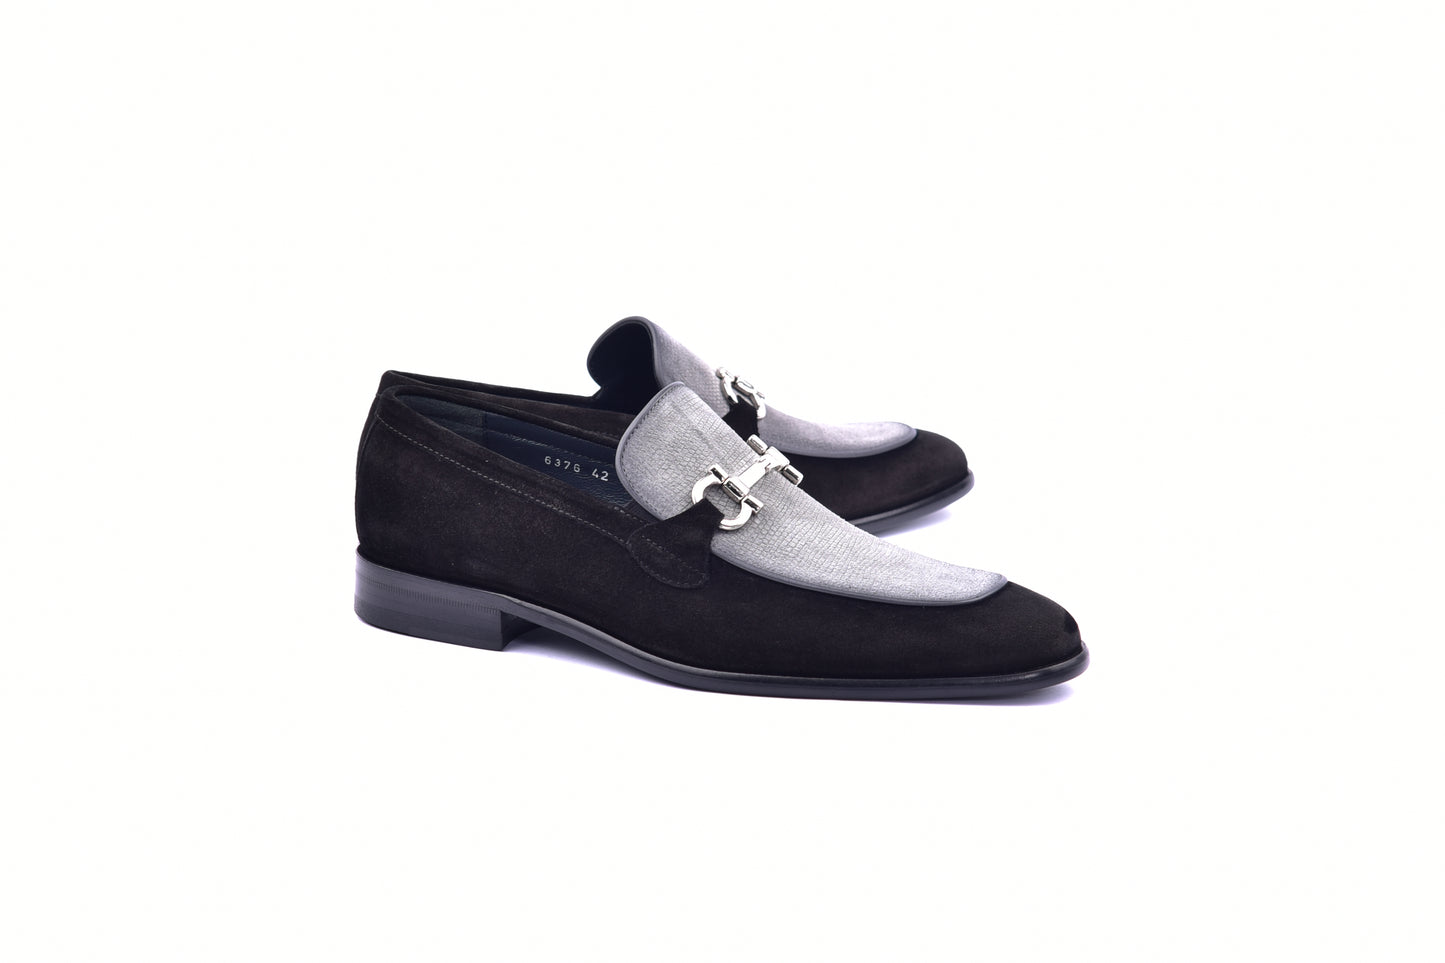 C11105-6376S Two Tone Suede Bit Loafer- Black-Grey